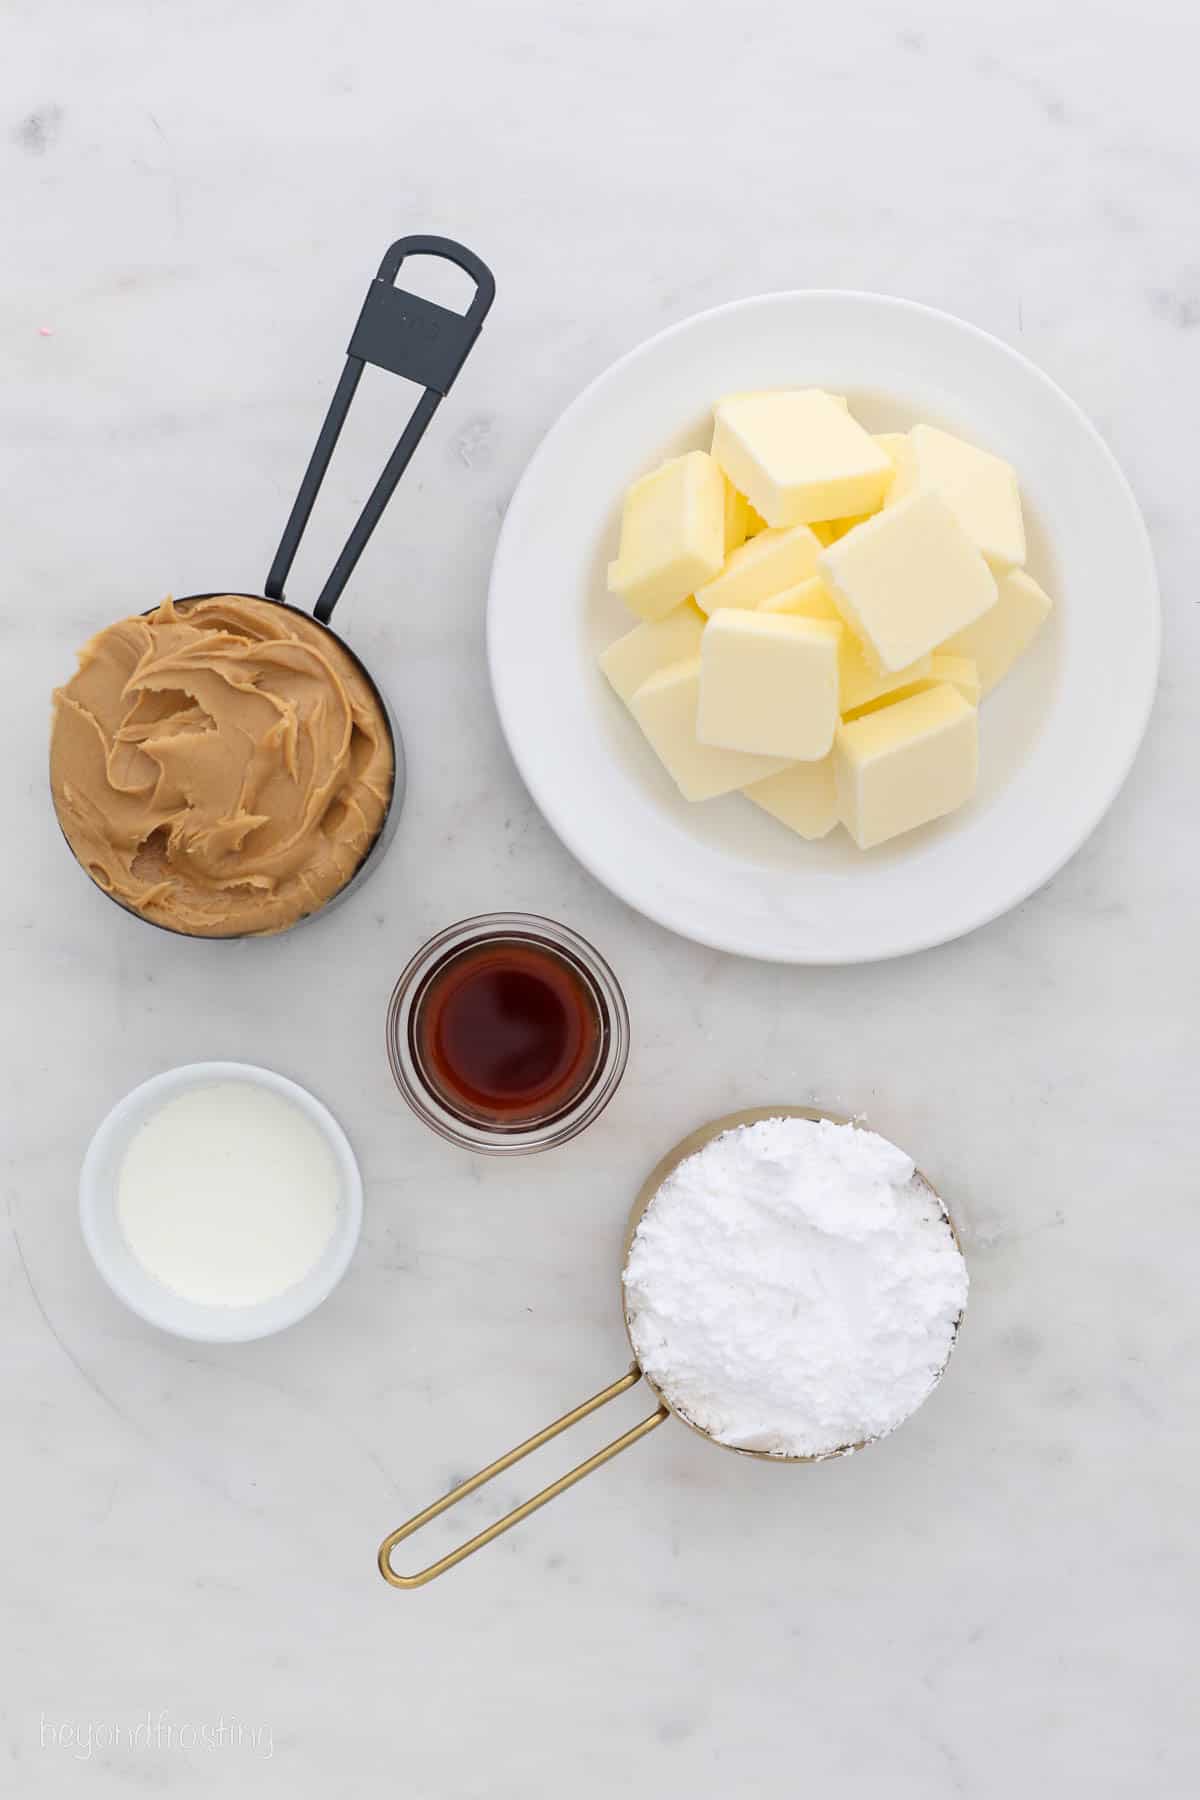 The ingredients for homemade peanut butter frosting.